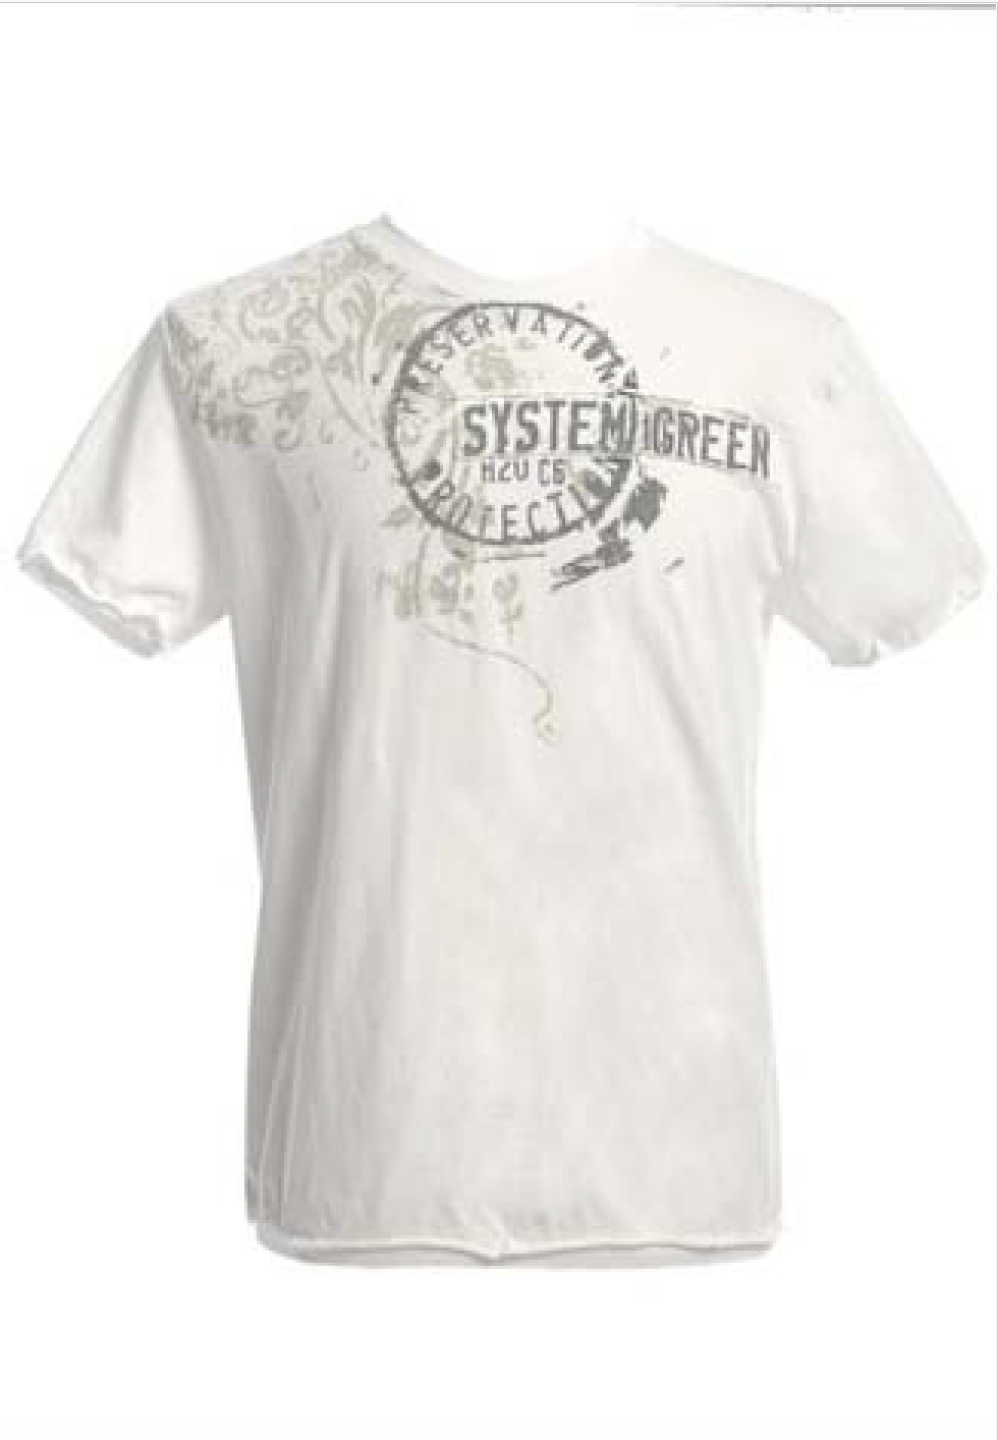 Itsus Vintage Men's T-Shirt "Stamp" in Down Pour (2009 Collection) - Email Us to Order